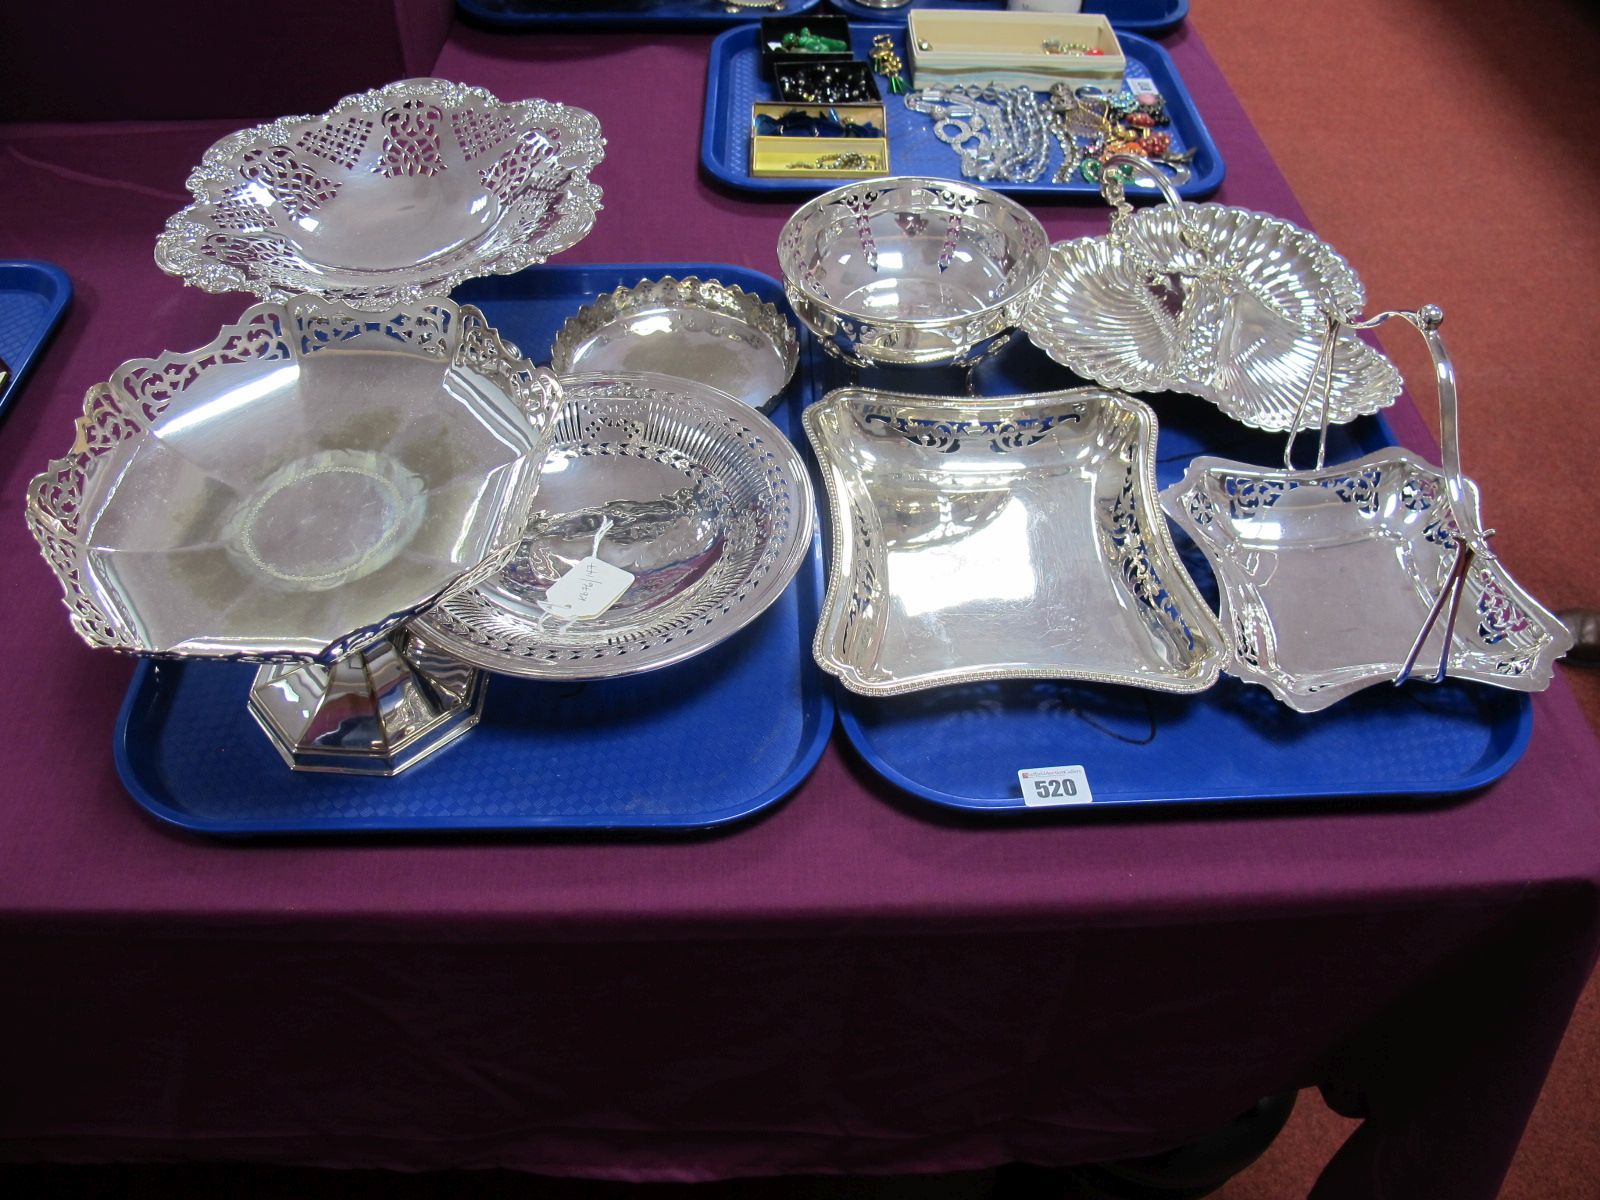 Assorted Decorative Plated Dishes, comports, etc.